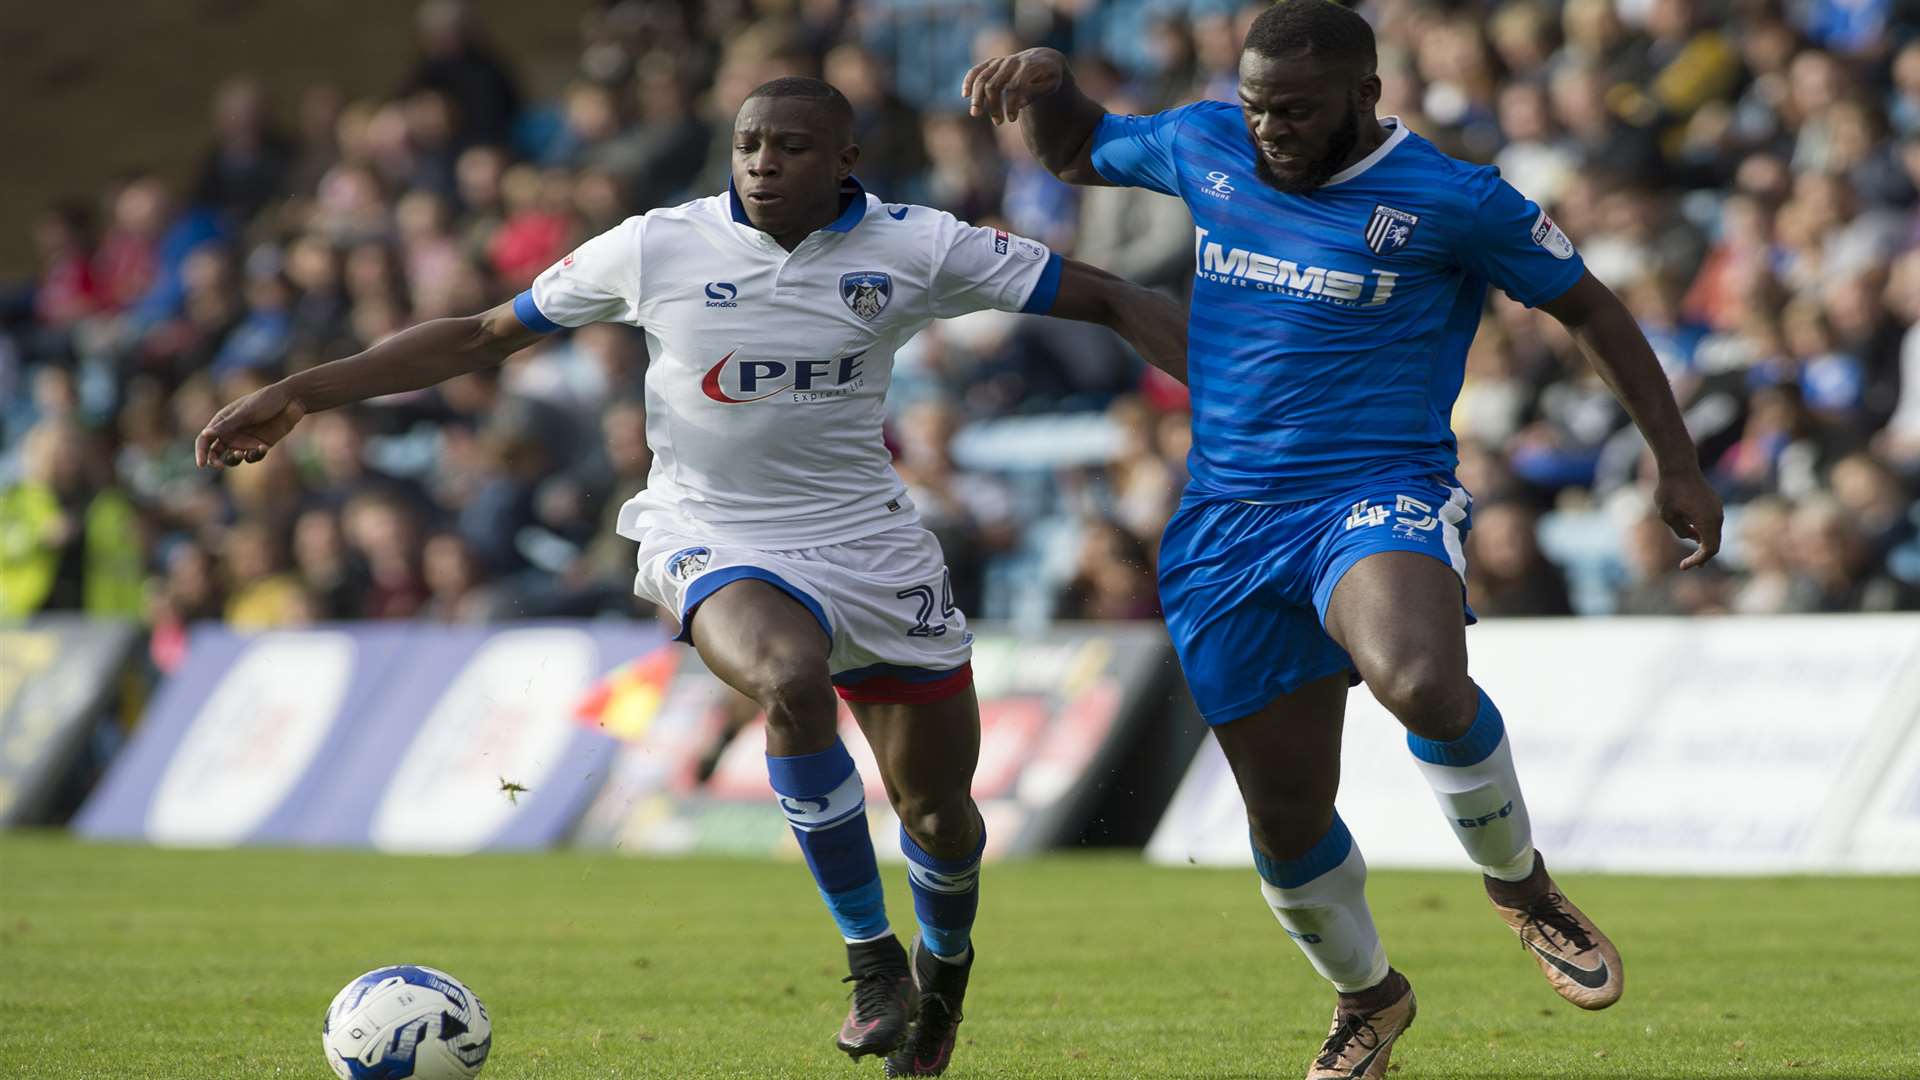 Frank Nouble battles with Oldham's Ousmane Fane on Saturday Picture: Andy Payton